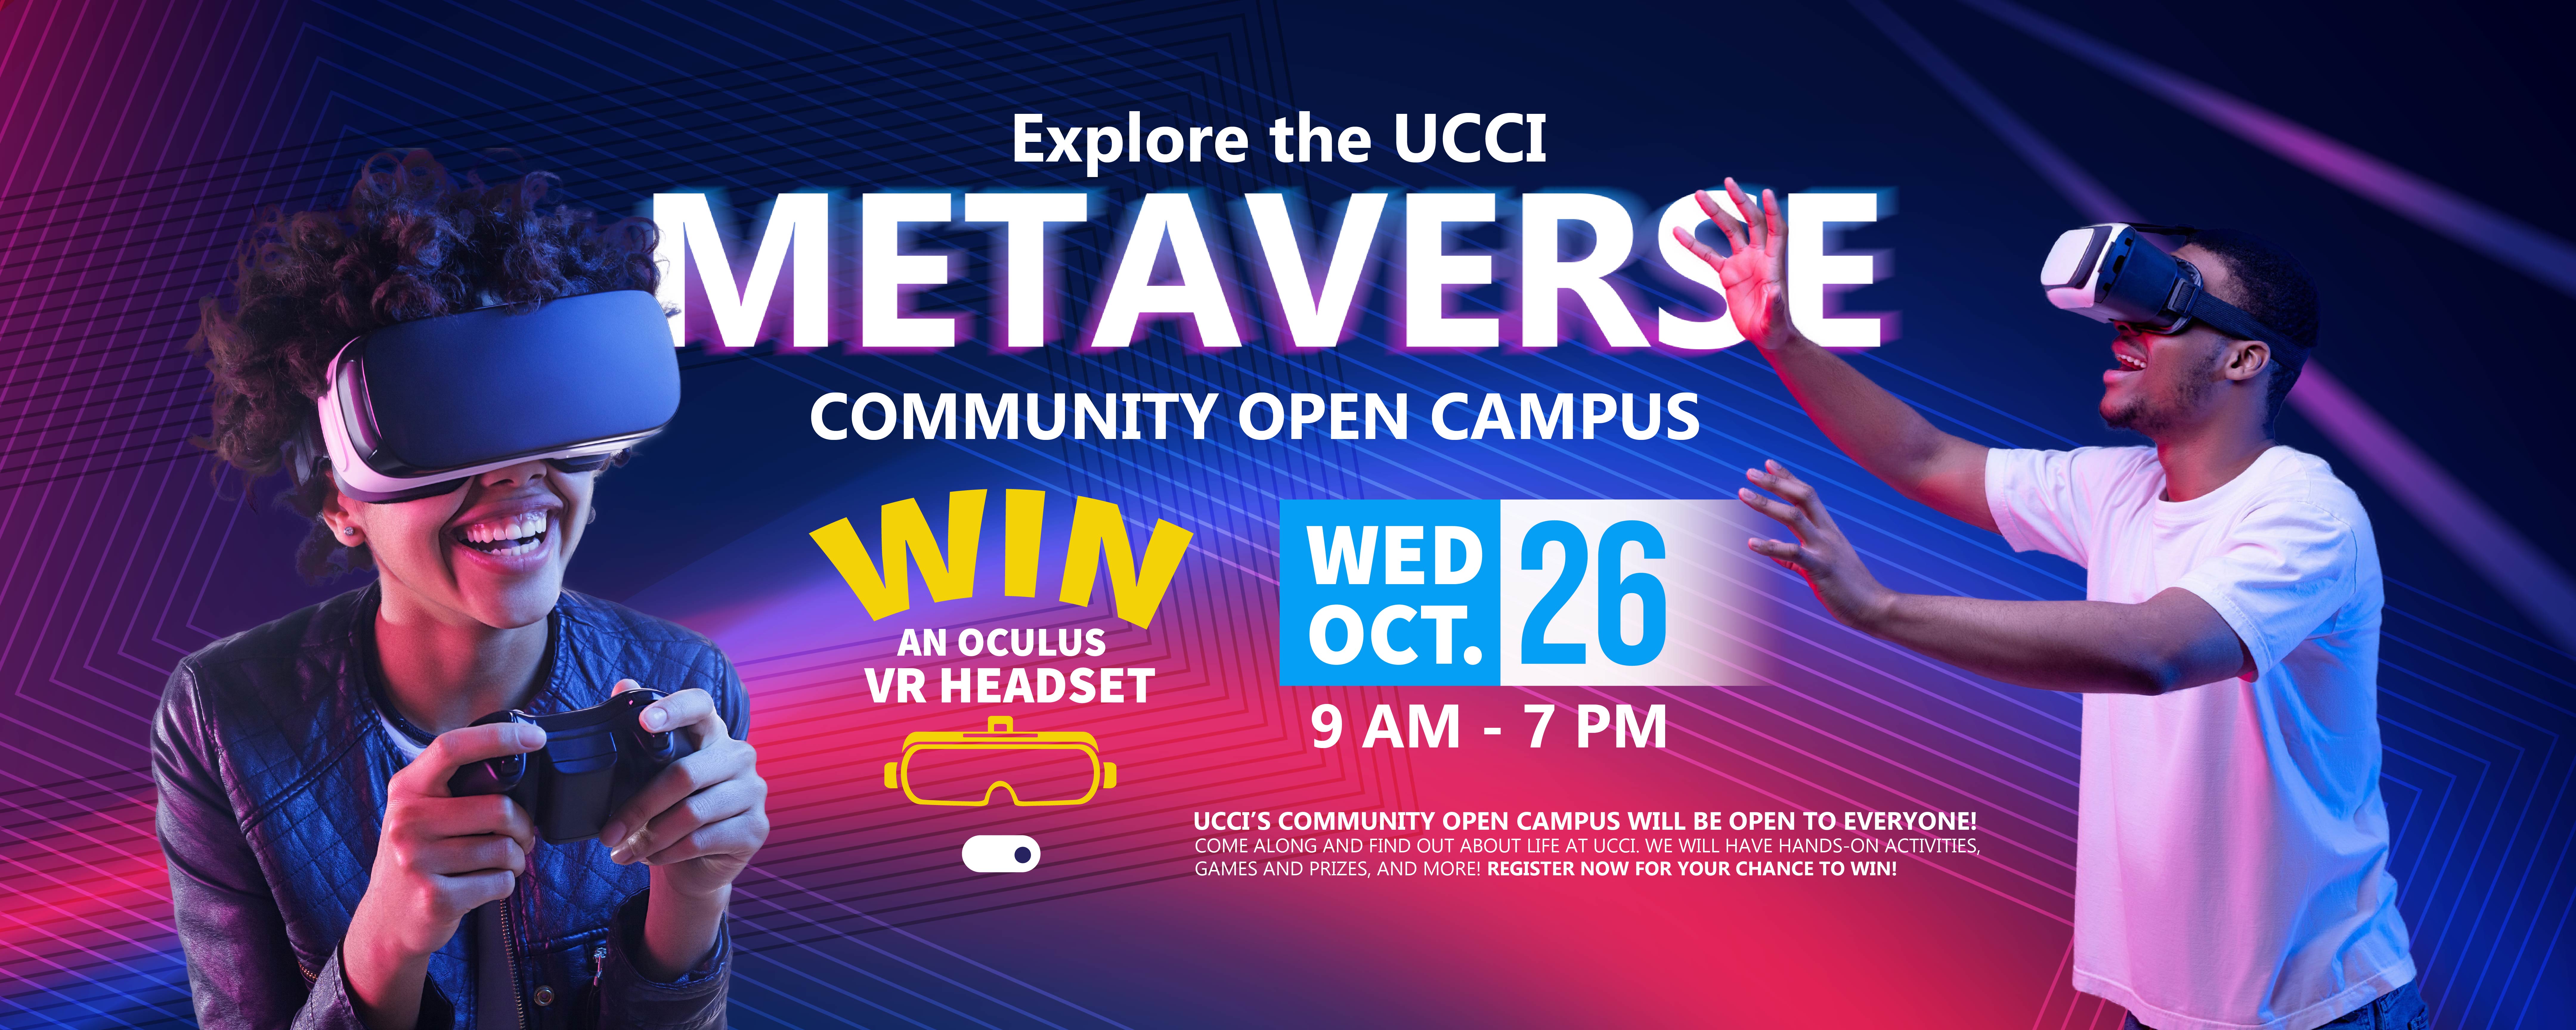 UCCI Open Campus and Metaverse Event